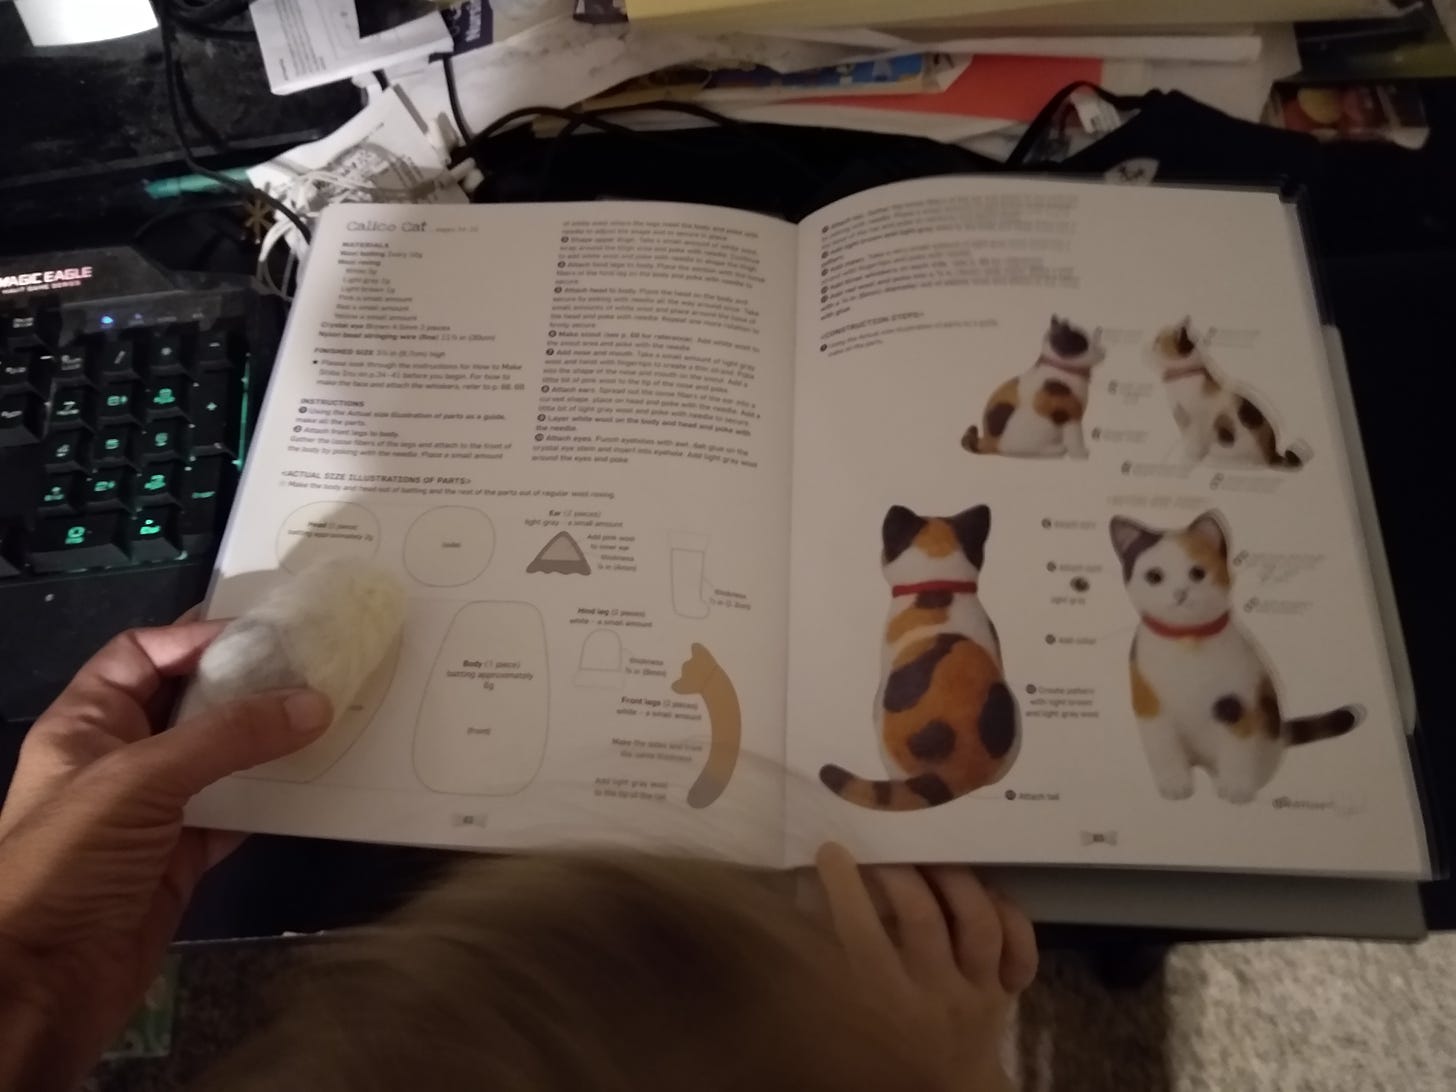 Inside of book, with instructions and pictures for needle felting a calico cat. Also some hands, and a bit of wool being shaped into a cat body.